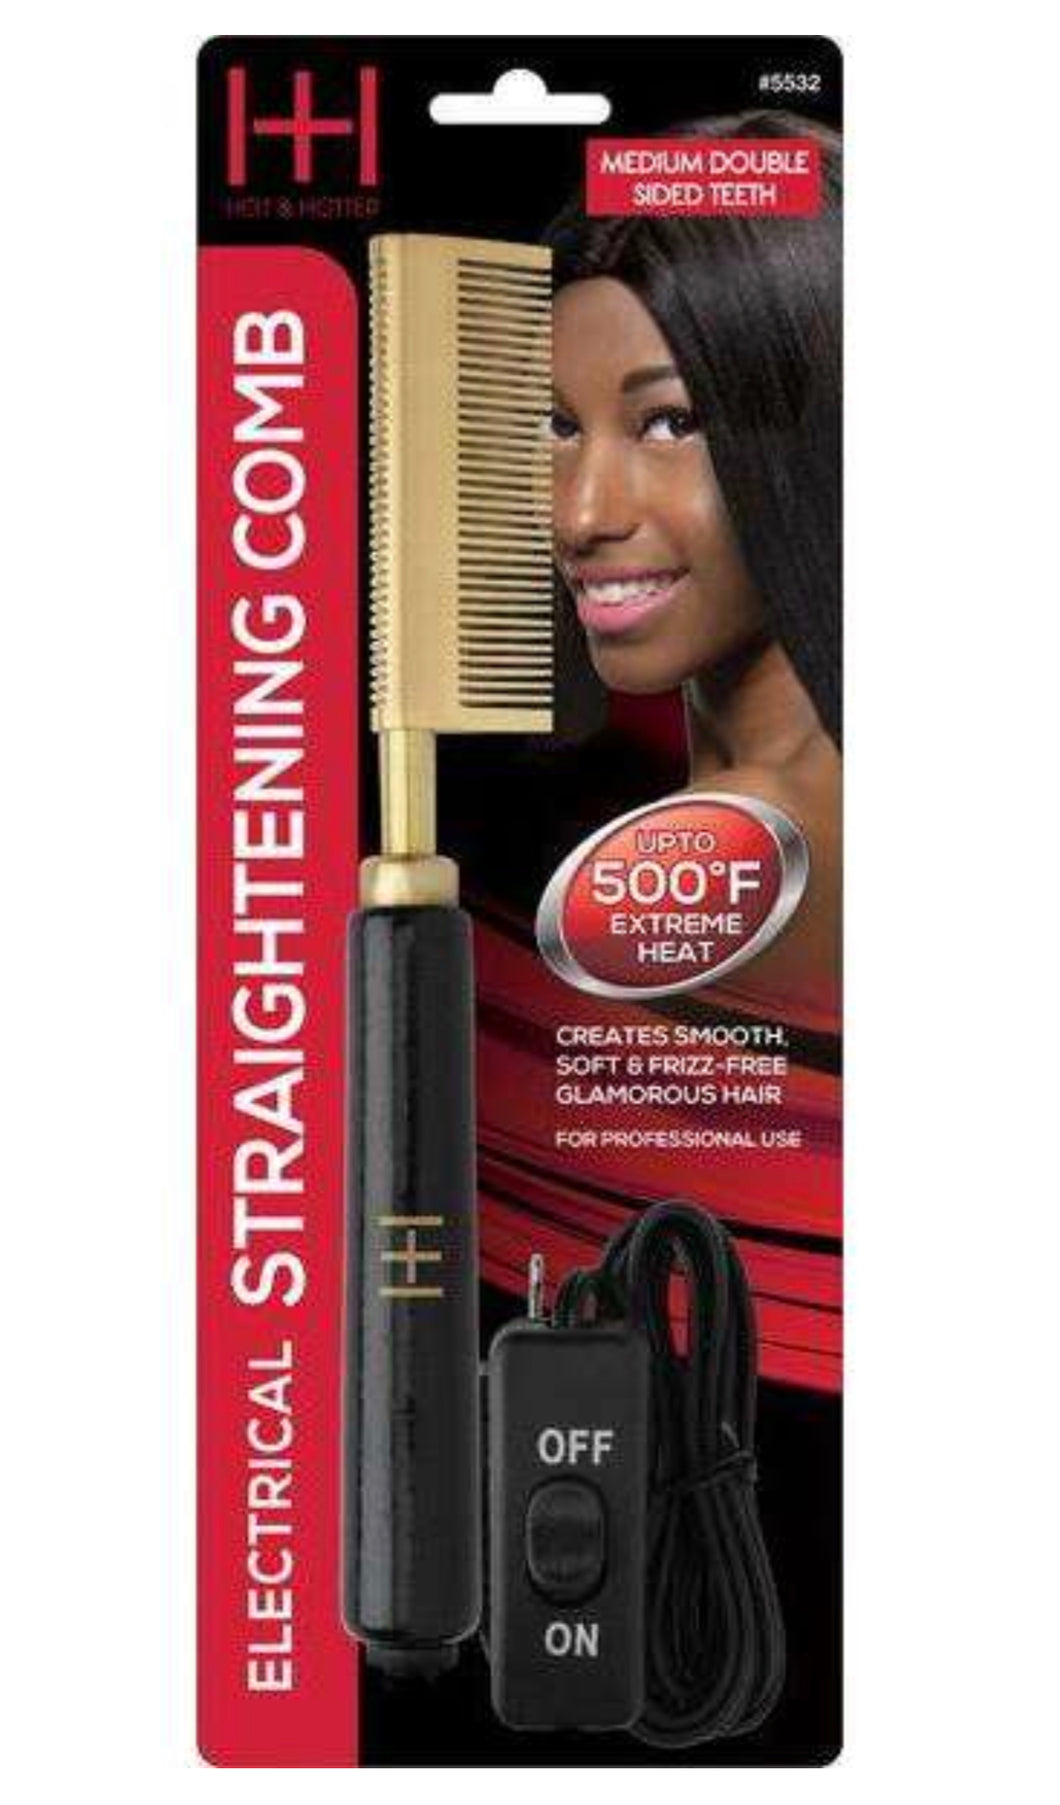 Annie Hot & Hotter Electric Straightening Hot Comb Medium Double Sided Teeth